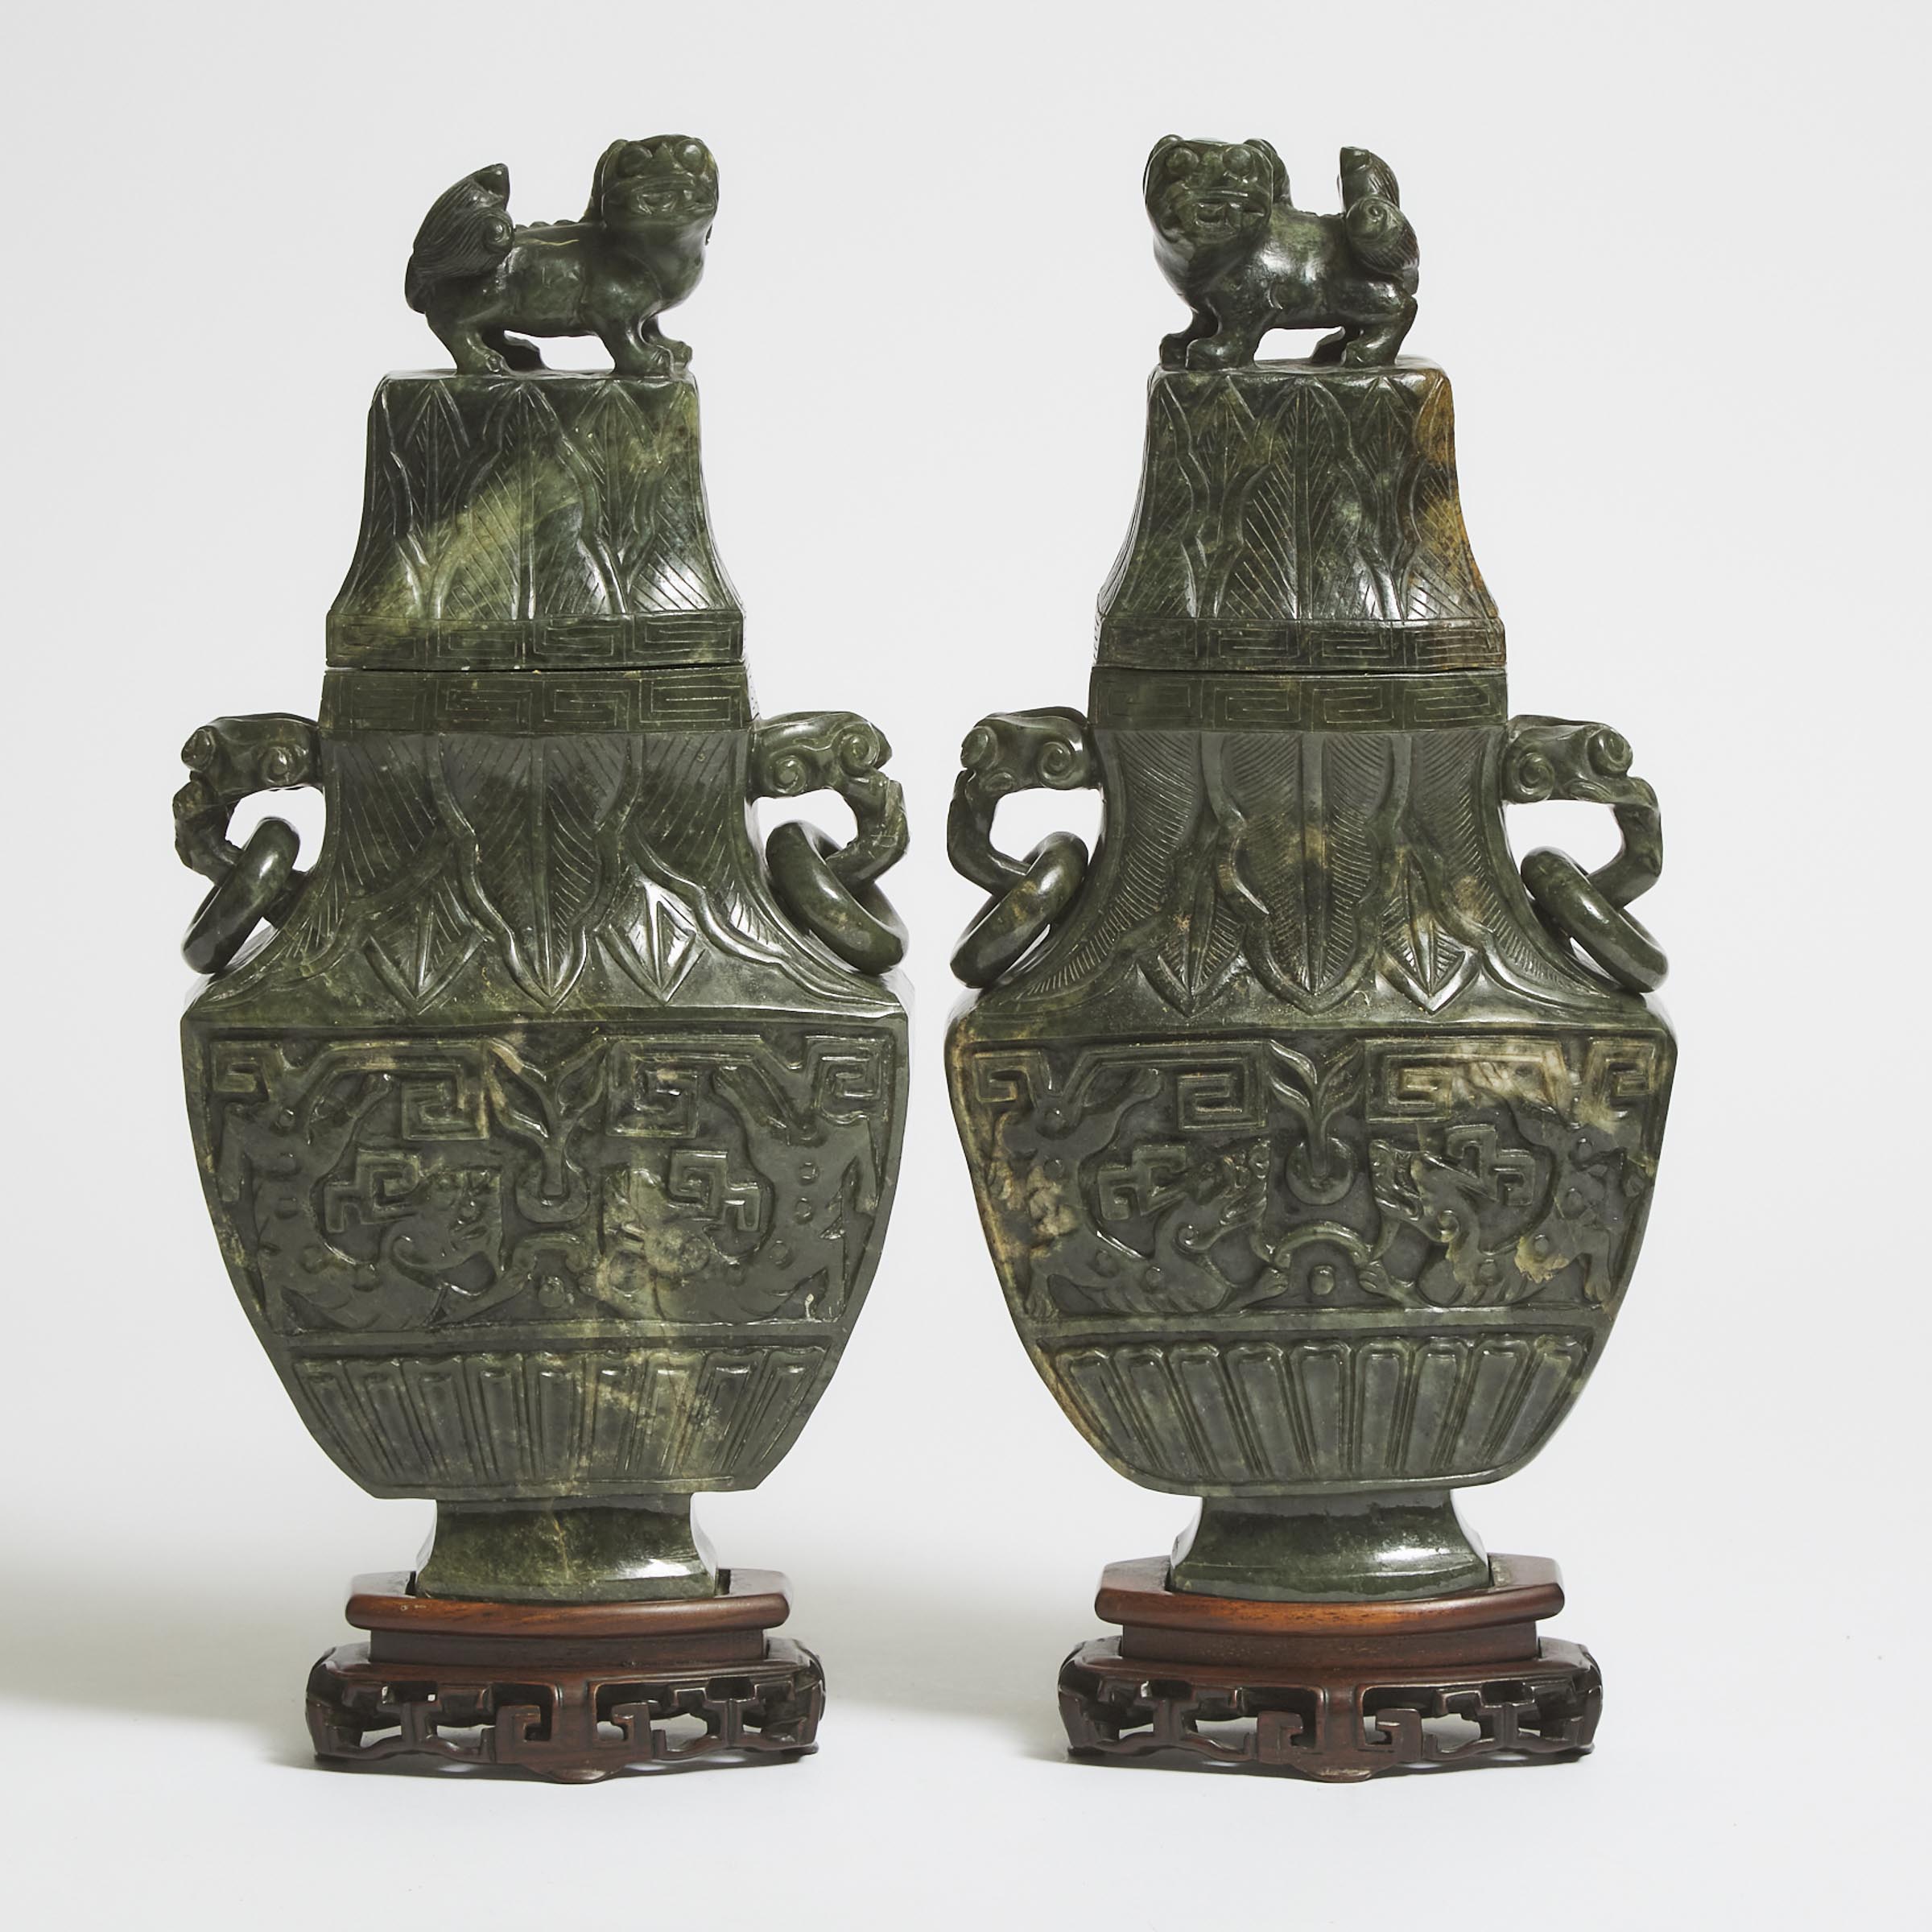 A Pair of Large Spinach Jade Vases